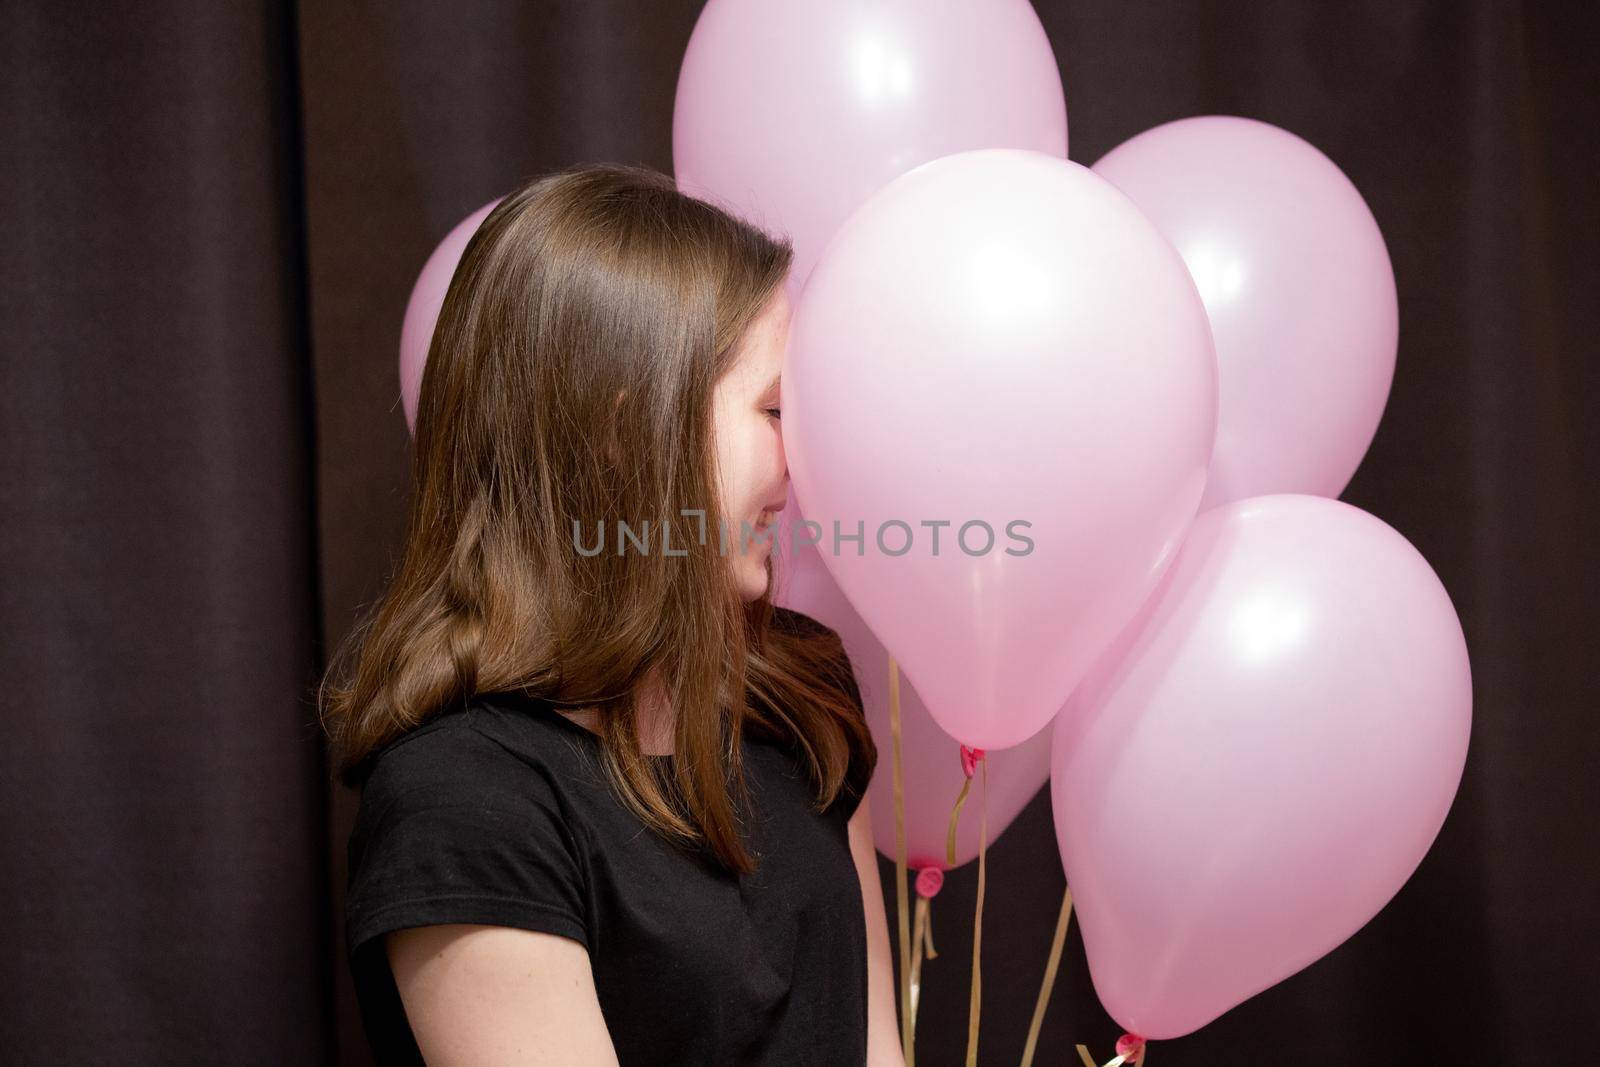 A cute young girl faces her pink balls, which she holds and smiles on a dark background.